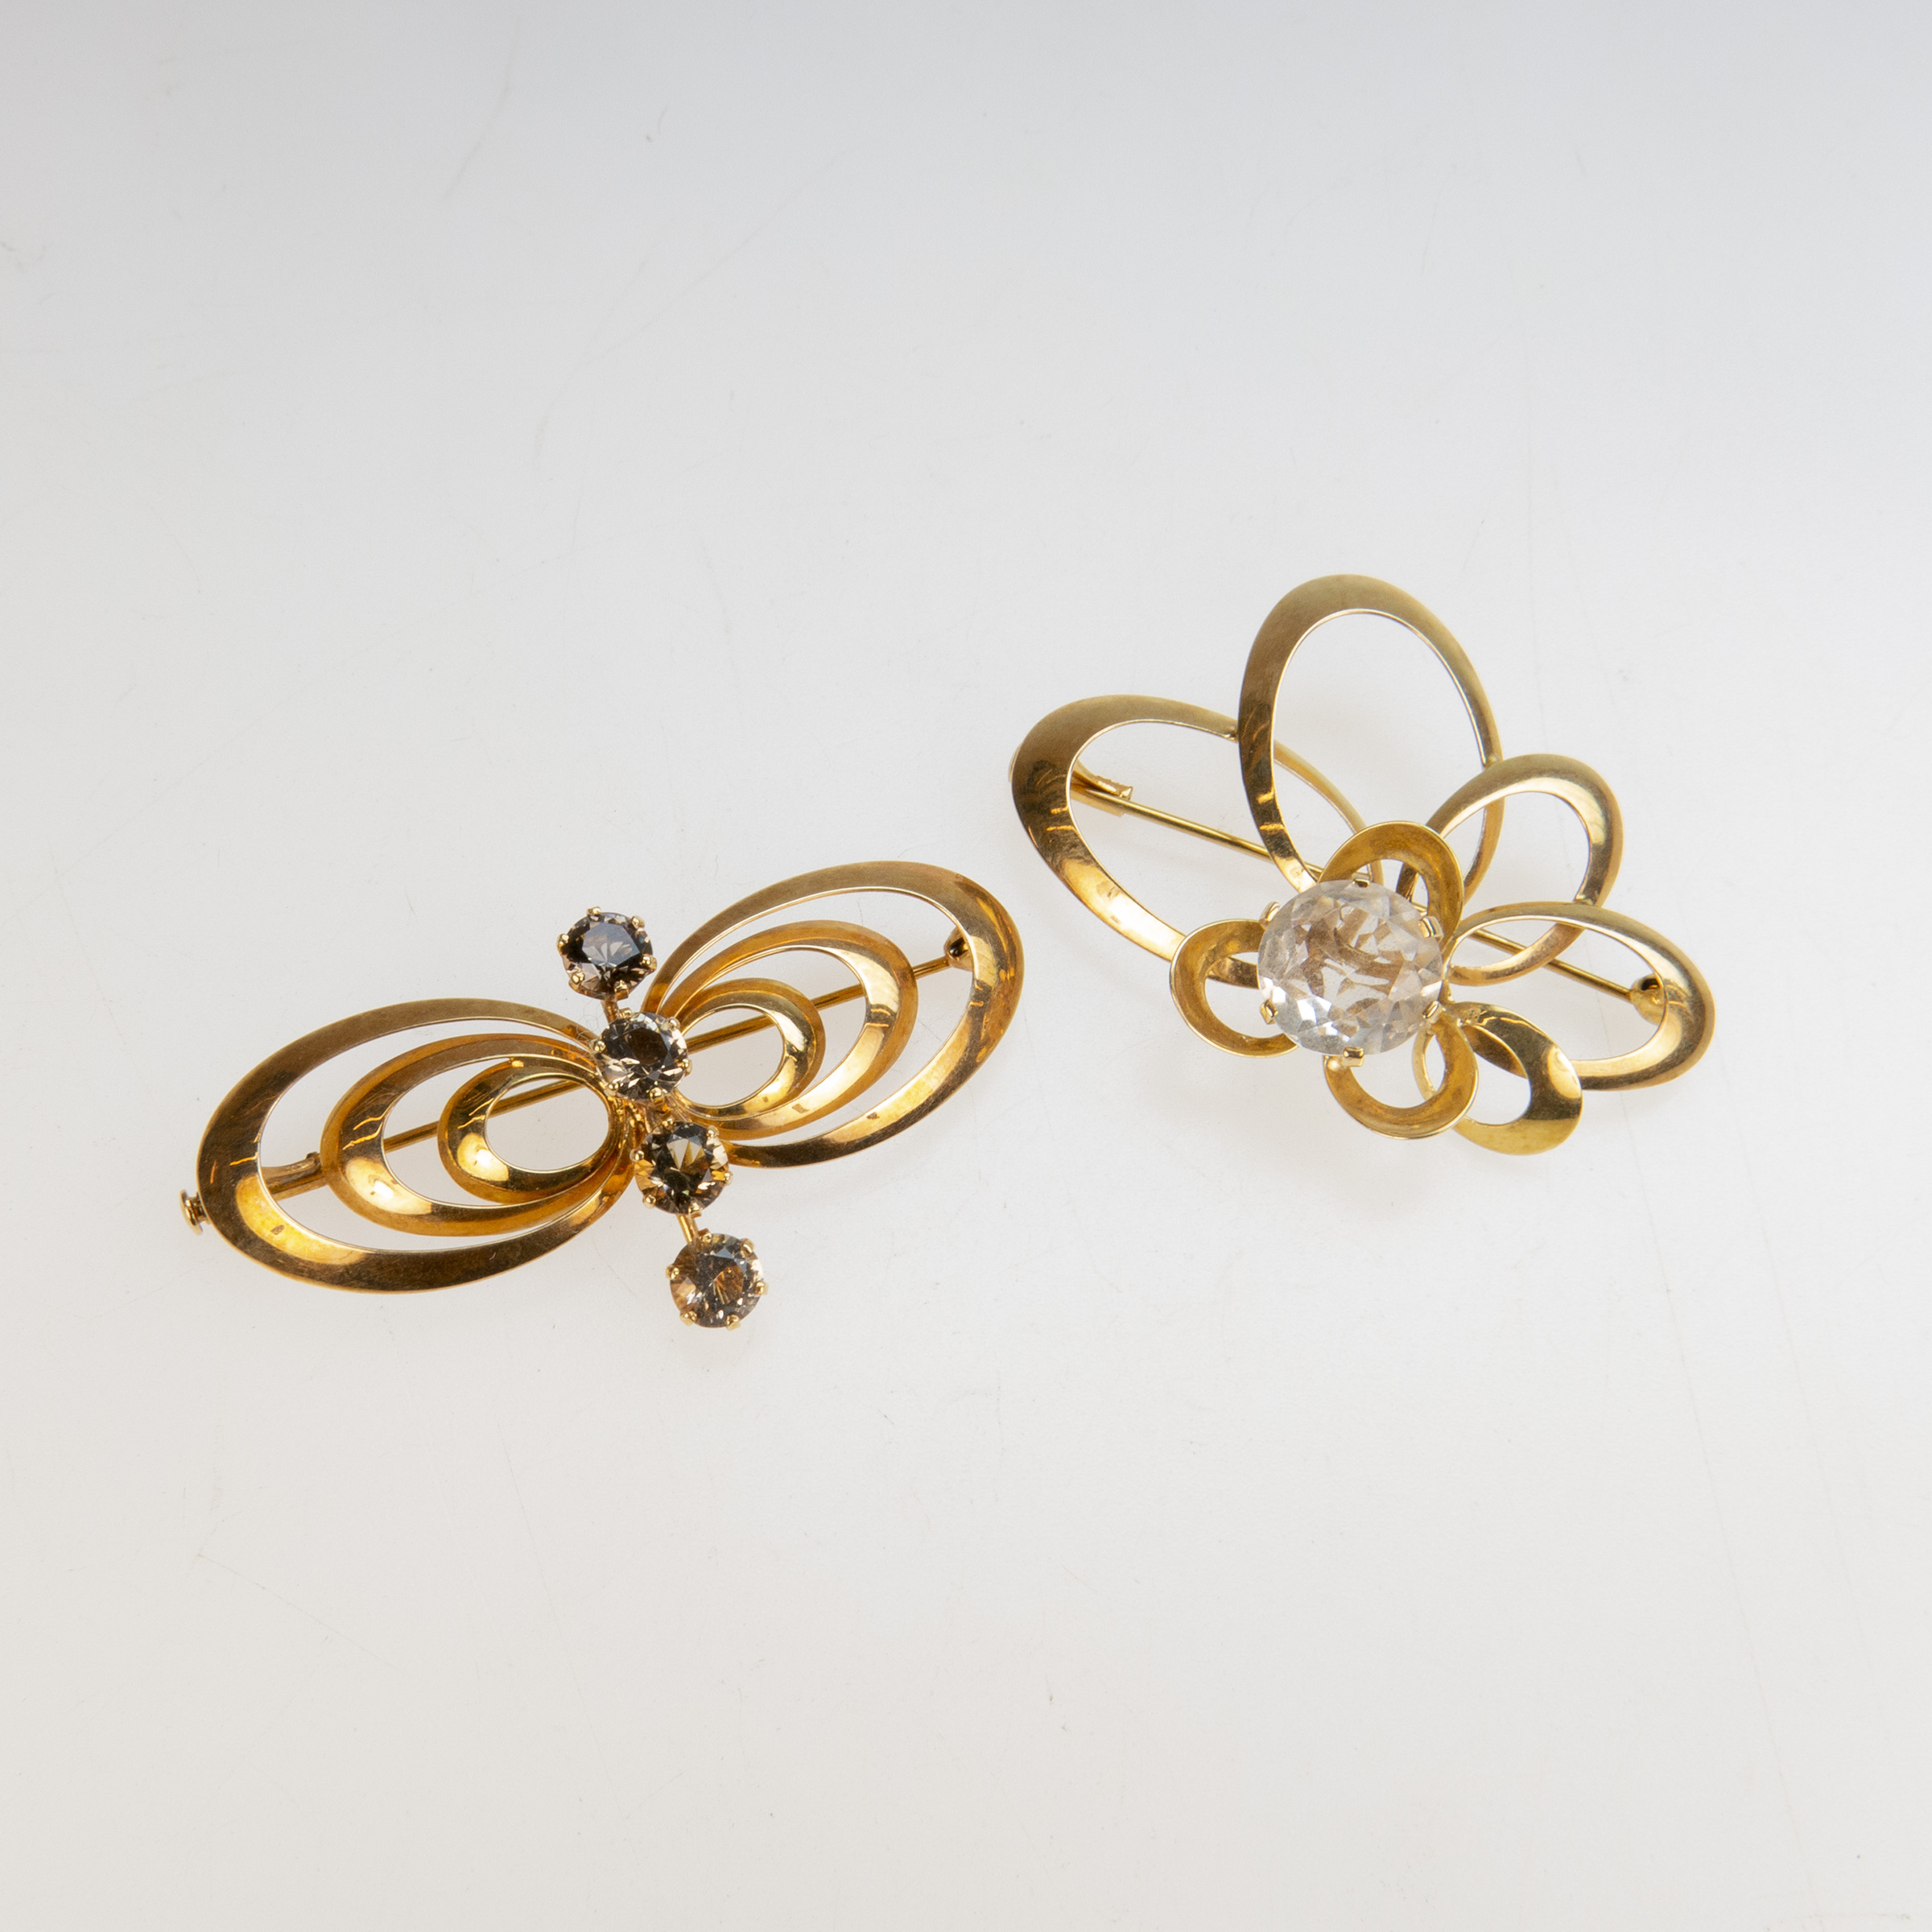 Two Finnish 14k Yellow Gold Brooches